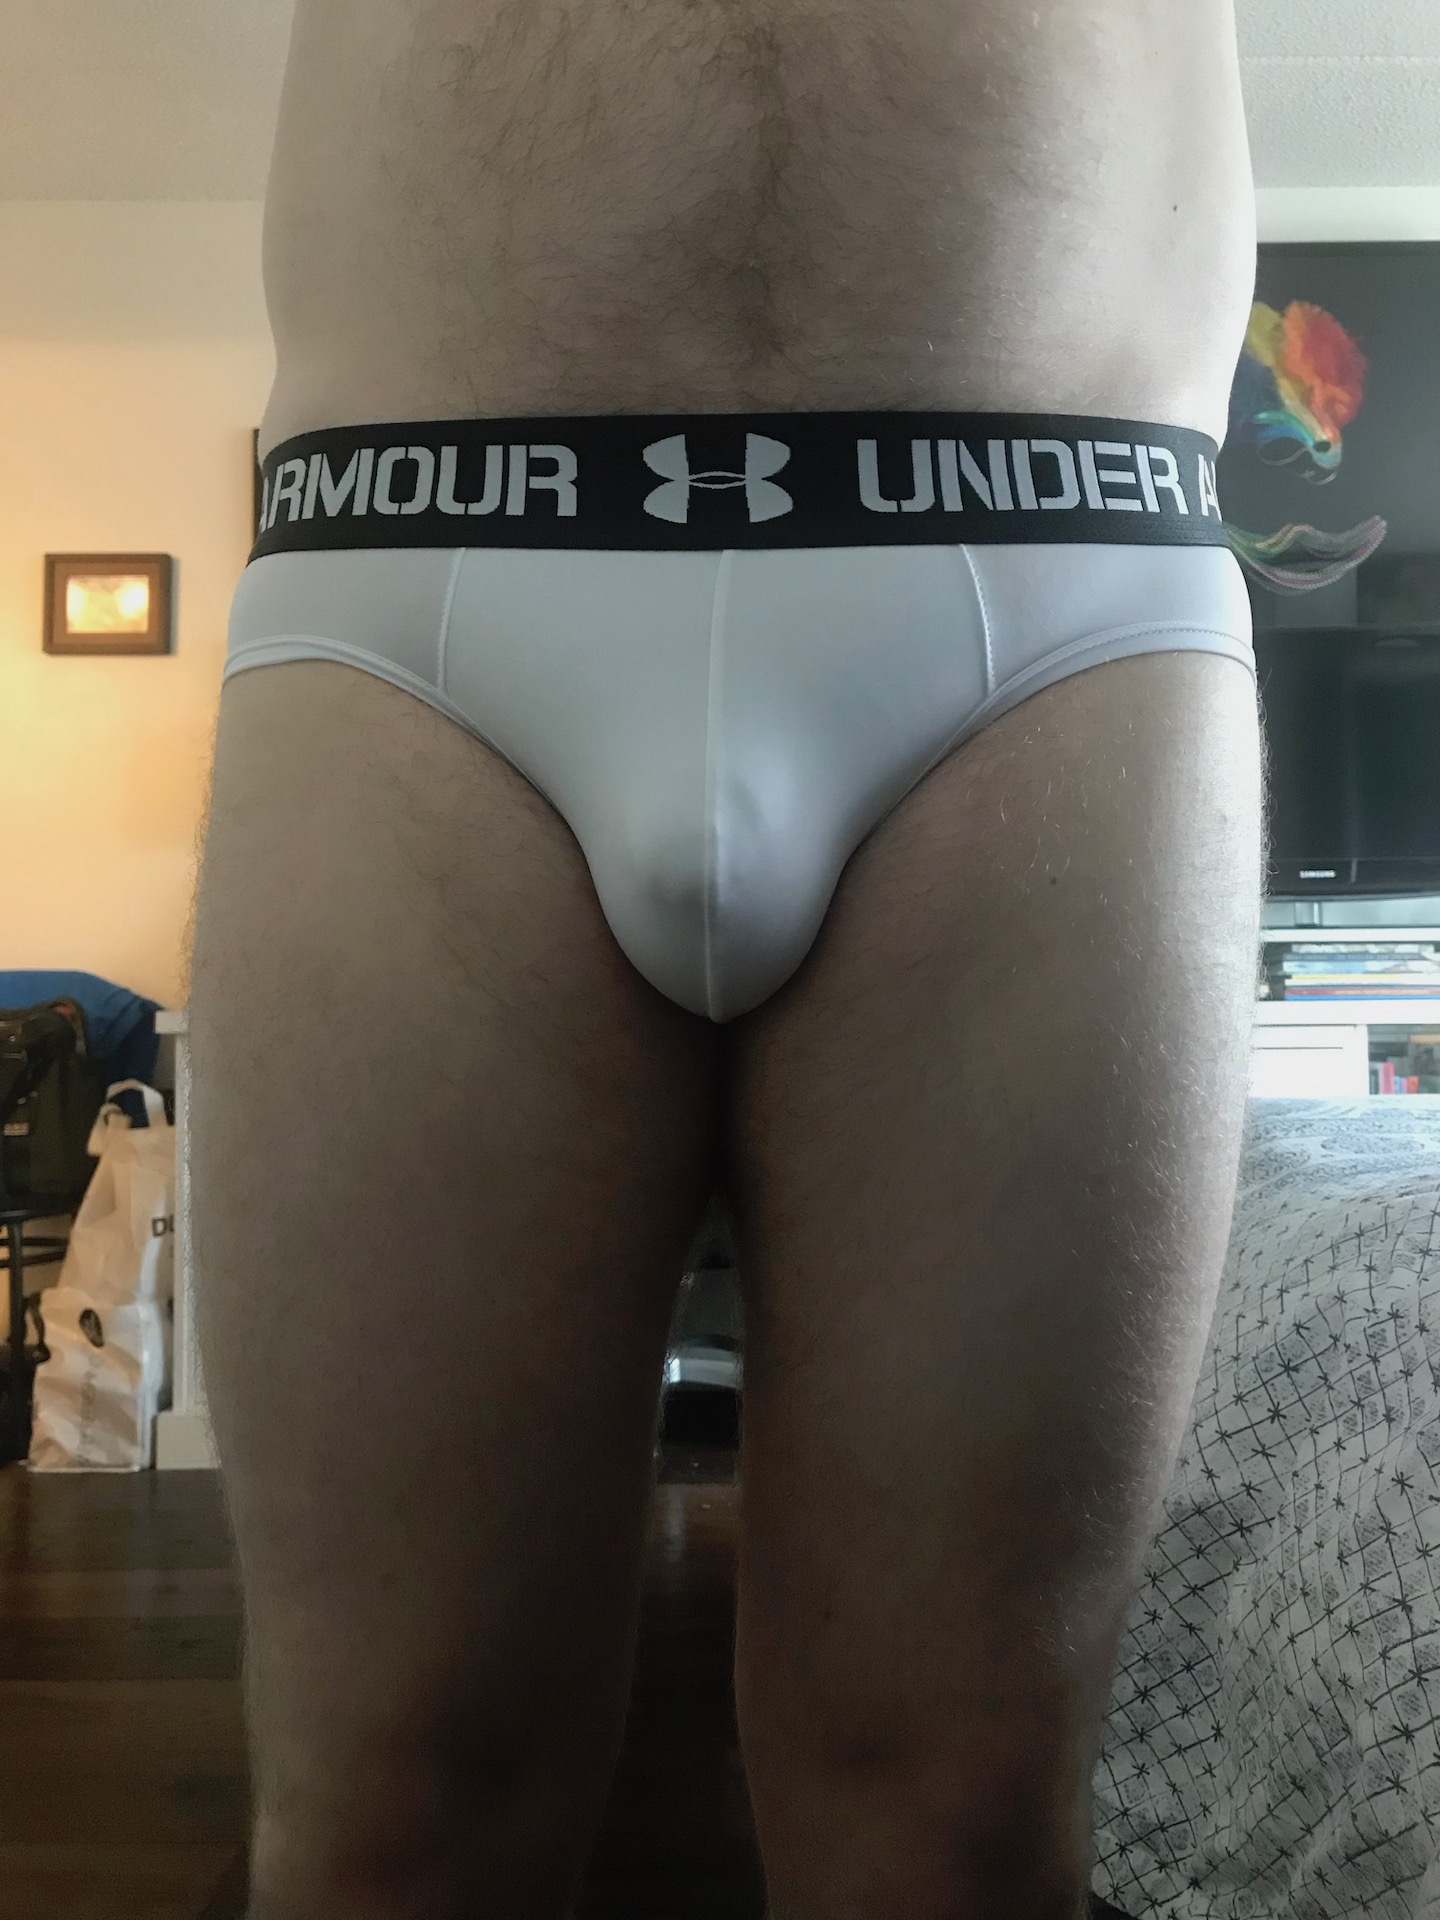 Rare briefs apparently, or so I’m told…